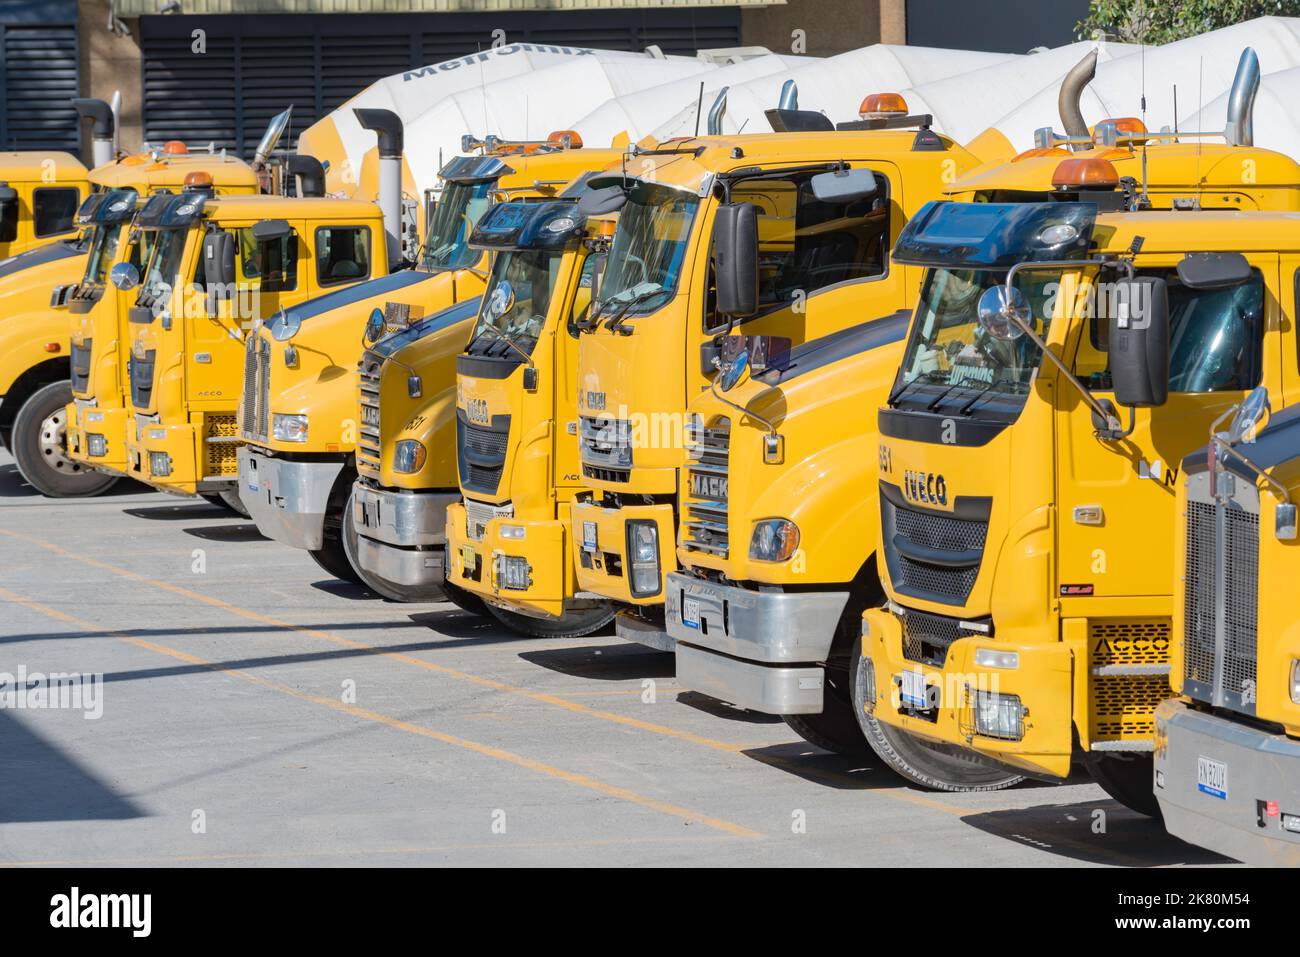 A line of yellow cement mixer trucks parked in a yard in Sydney, New South Wales, Australia Stock Photo